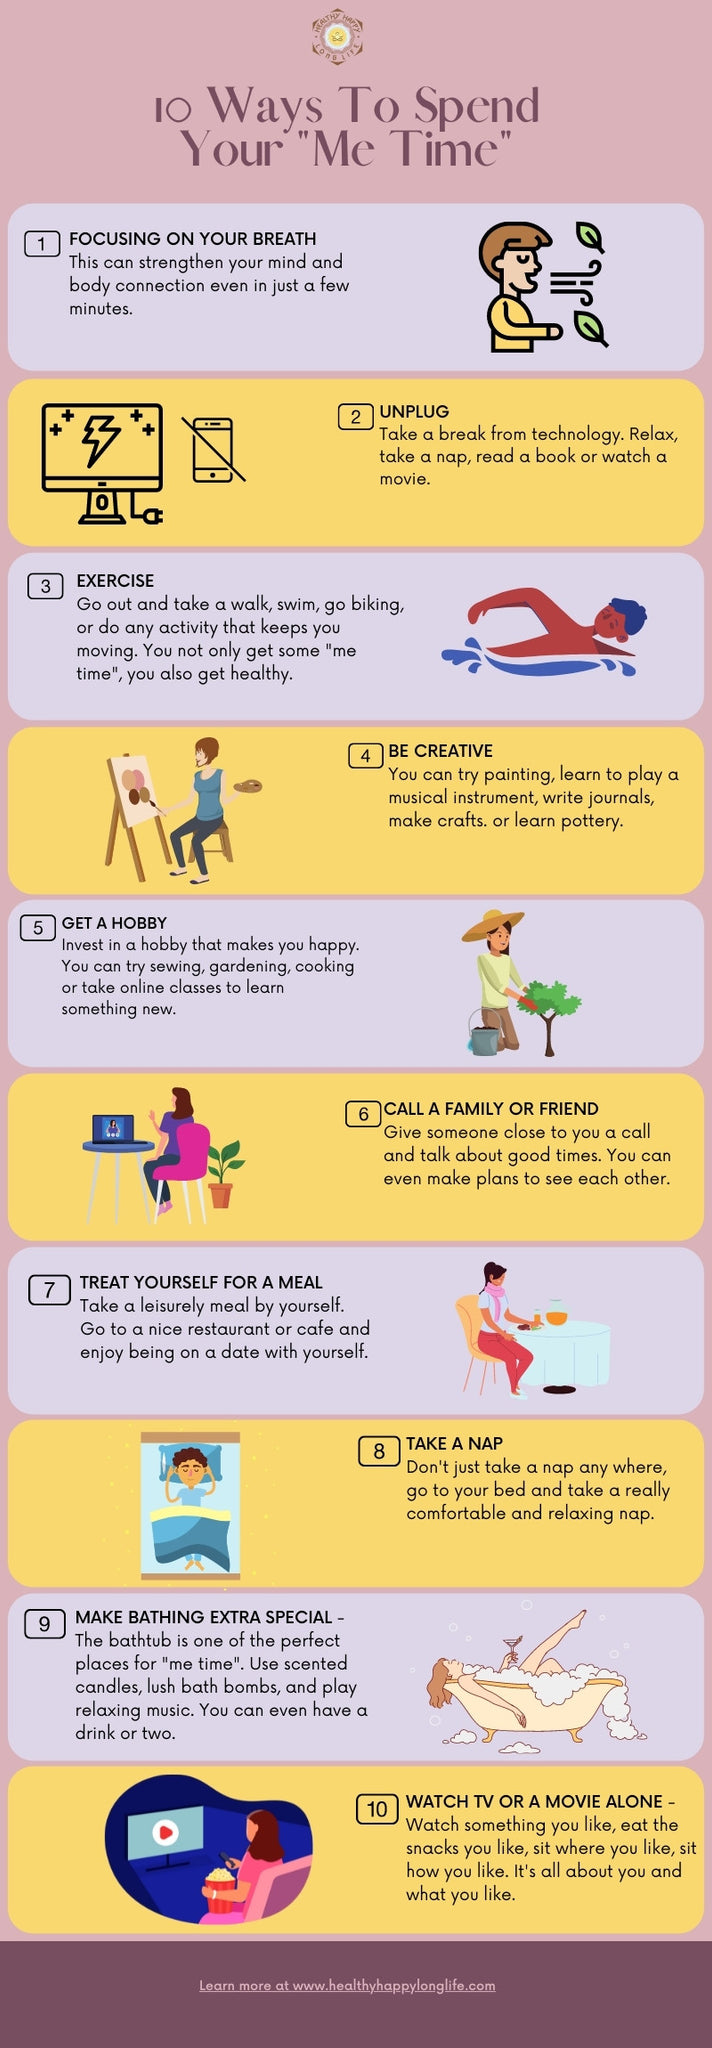 10 Ways To Spend Your "Me Time"